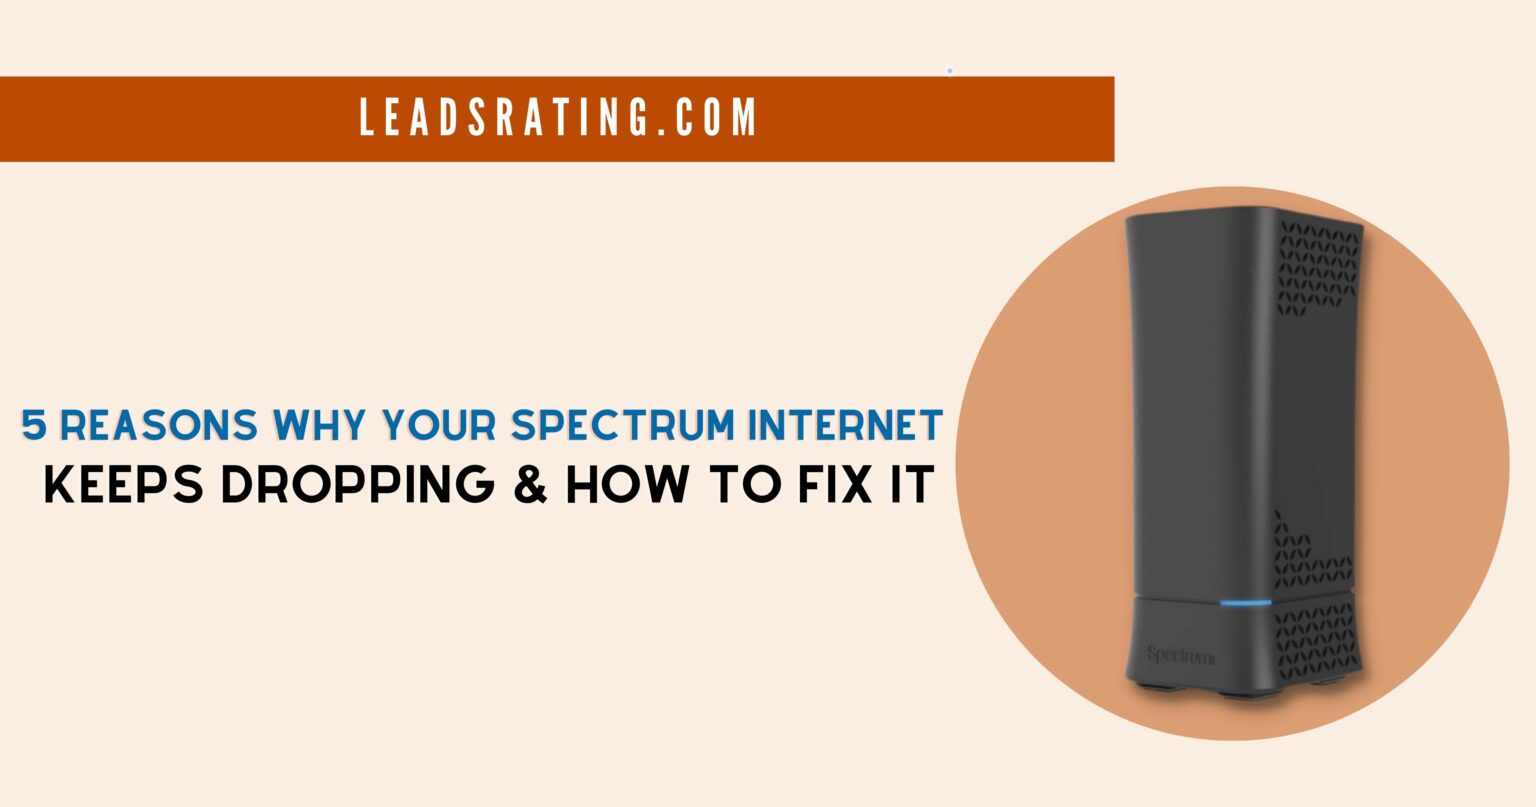 5 Reasons Why Your Spectrum Keeps Dropping & How to Easily Fix It